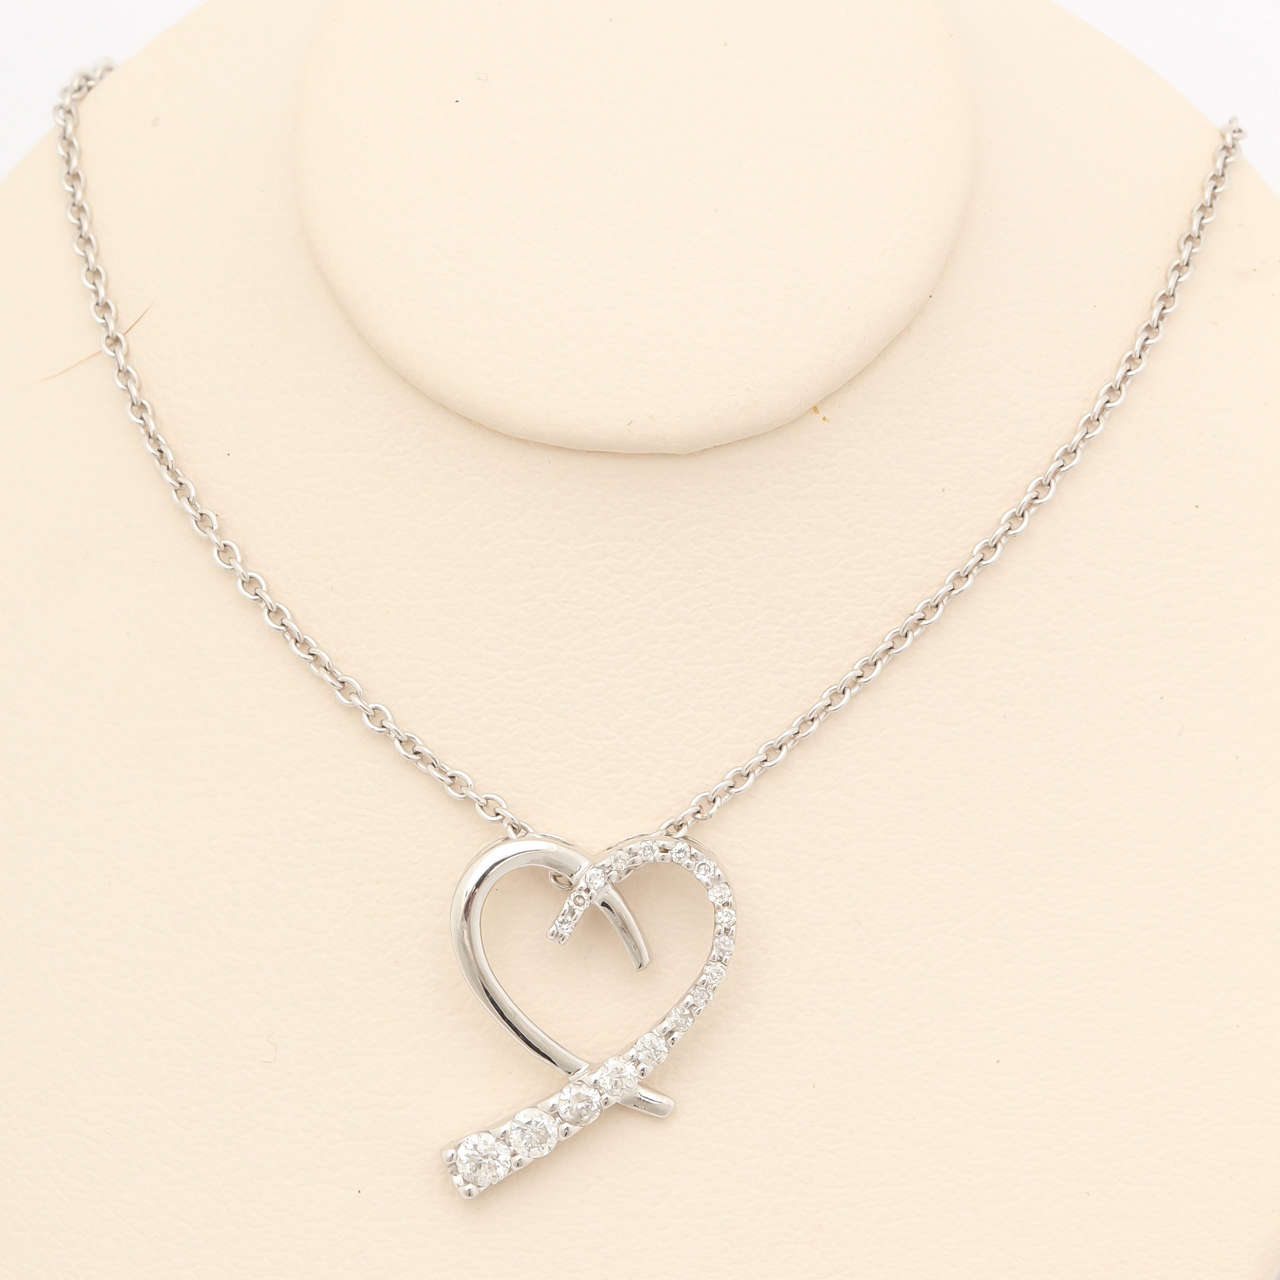 A sweet gift for any occasion; 14 kt white gold and 0.25 ct diamond pendant heart necklace. This necklace symbolizes love's journey, 18 diamonds graduated from the smallest to the largest in an eye-catching heart shape. The pendant is suspended from